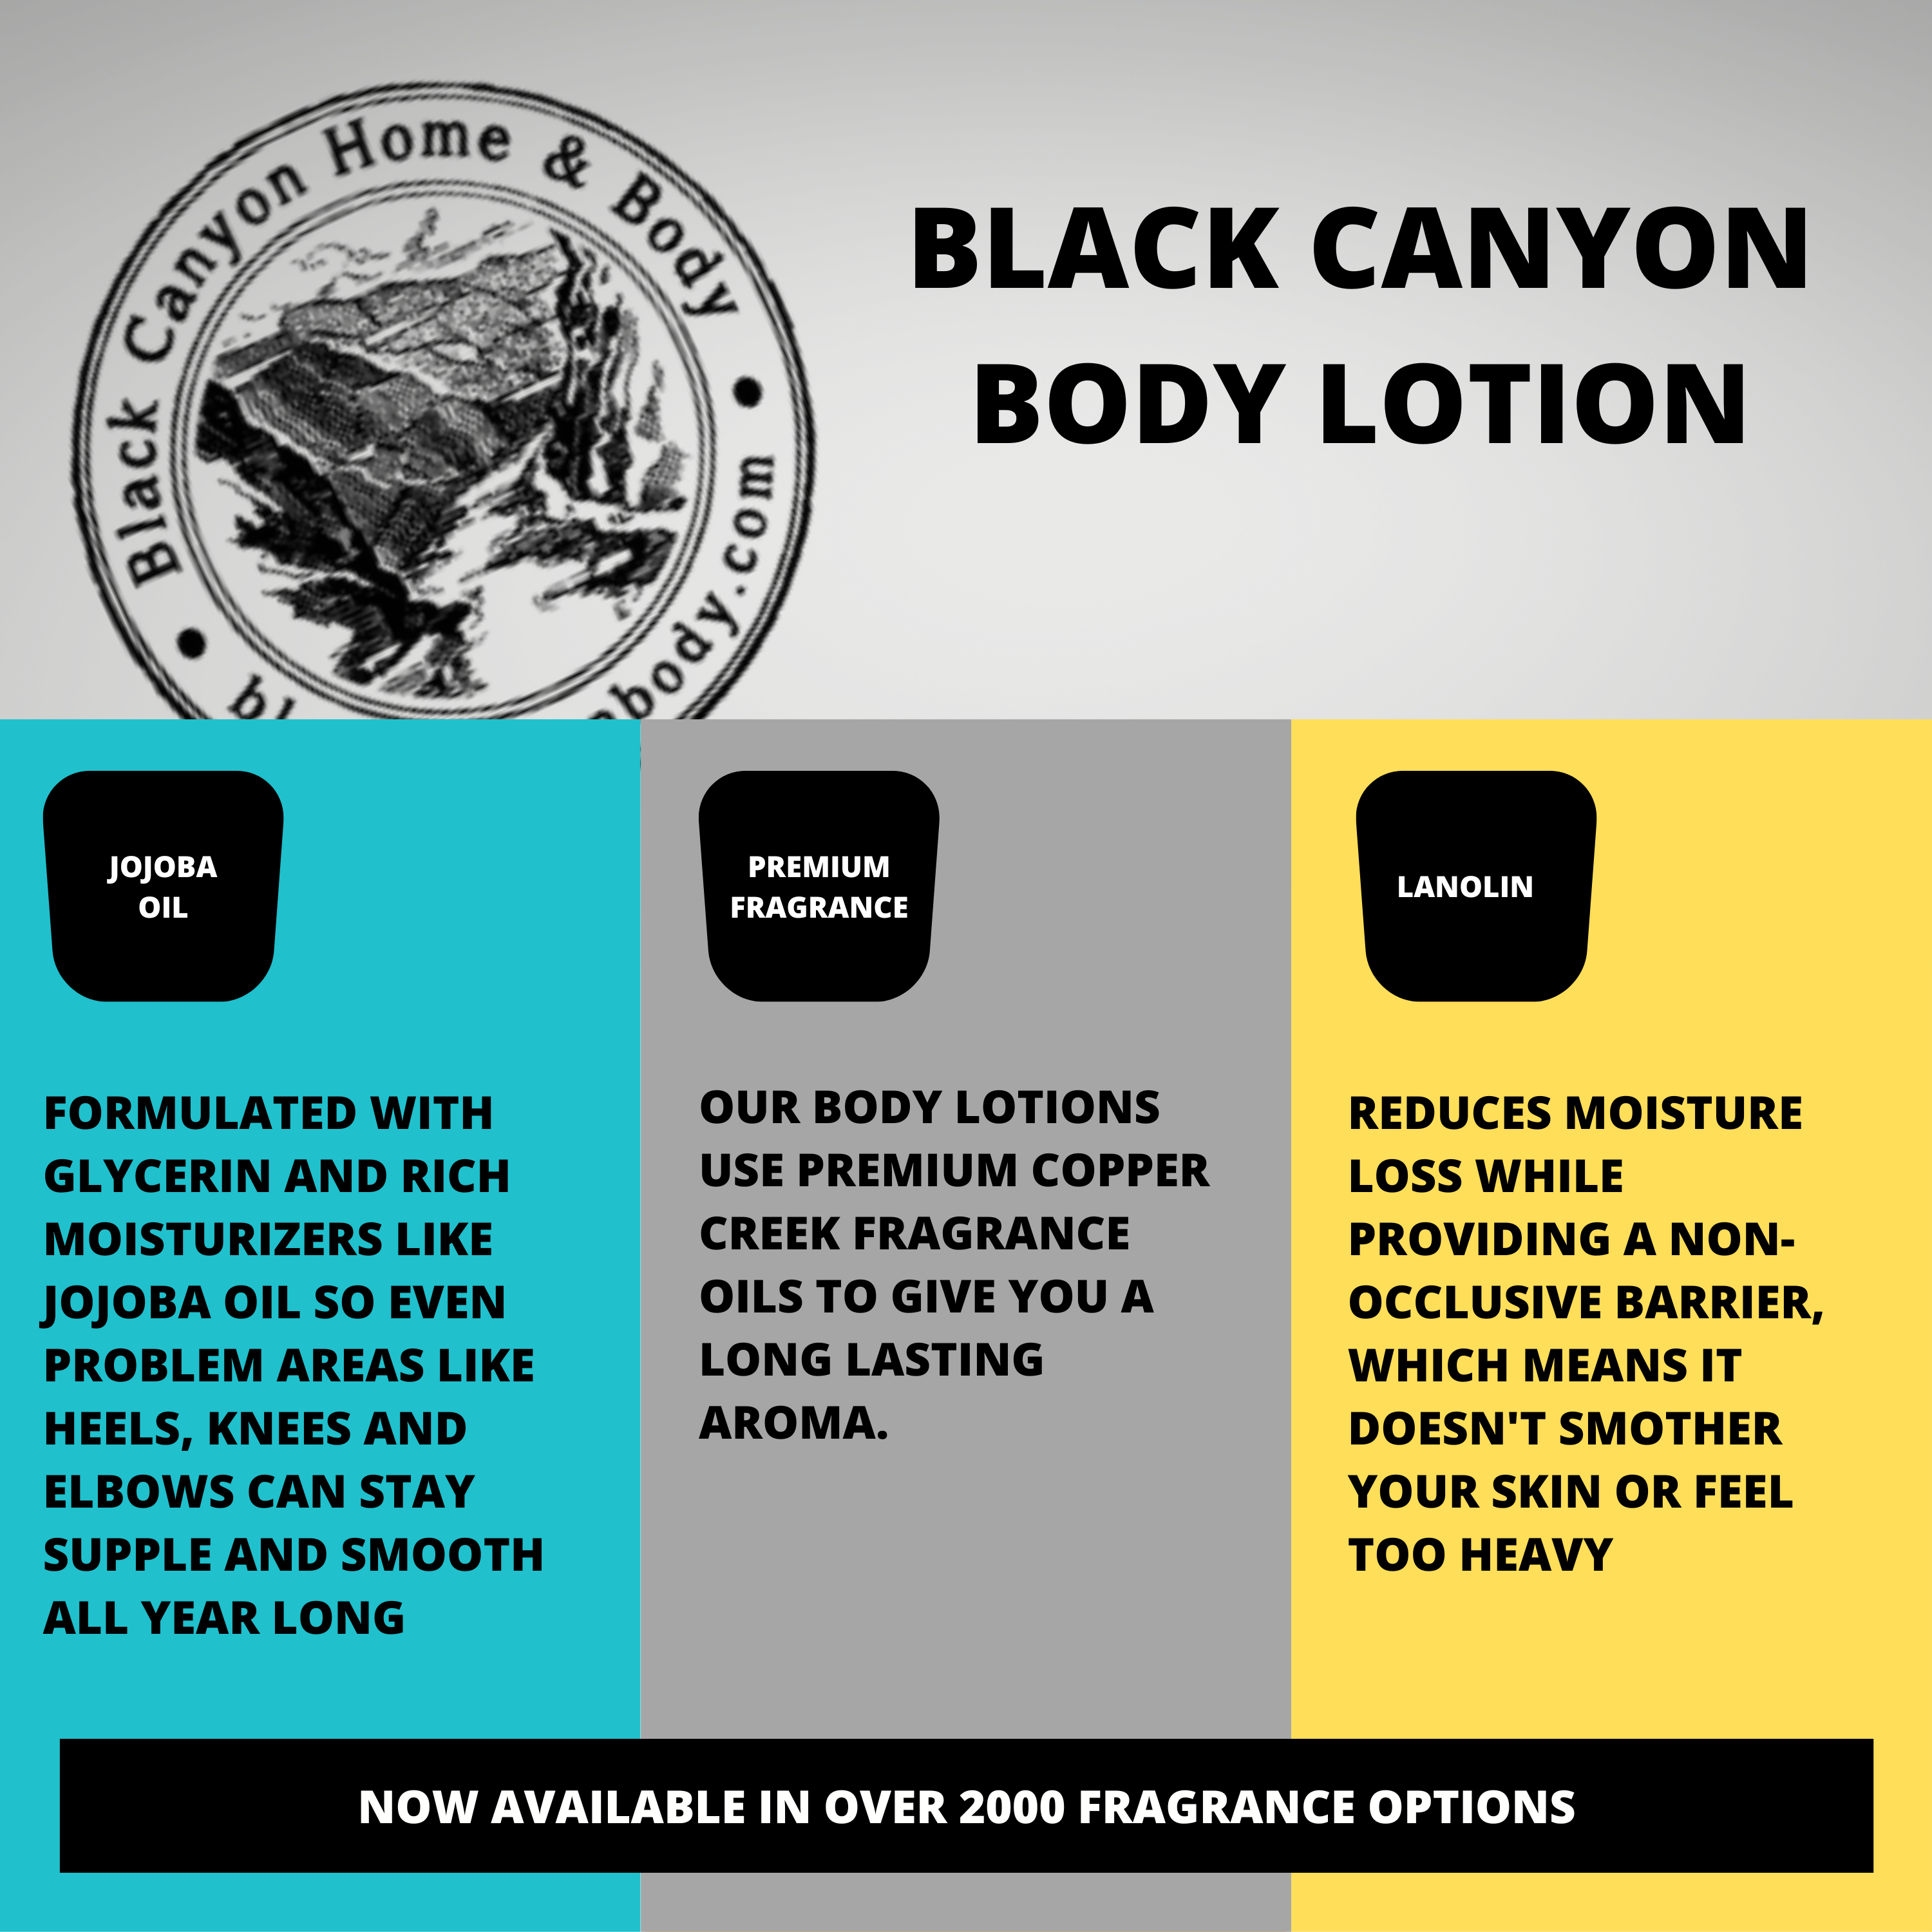 Black Canyon Silk Panties Scented Luxury Body Lotion with Lanolin and Jojoba Oil